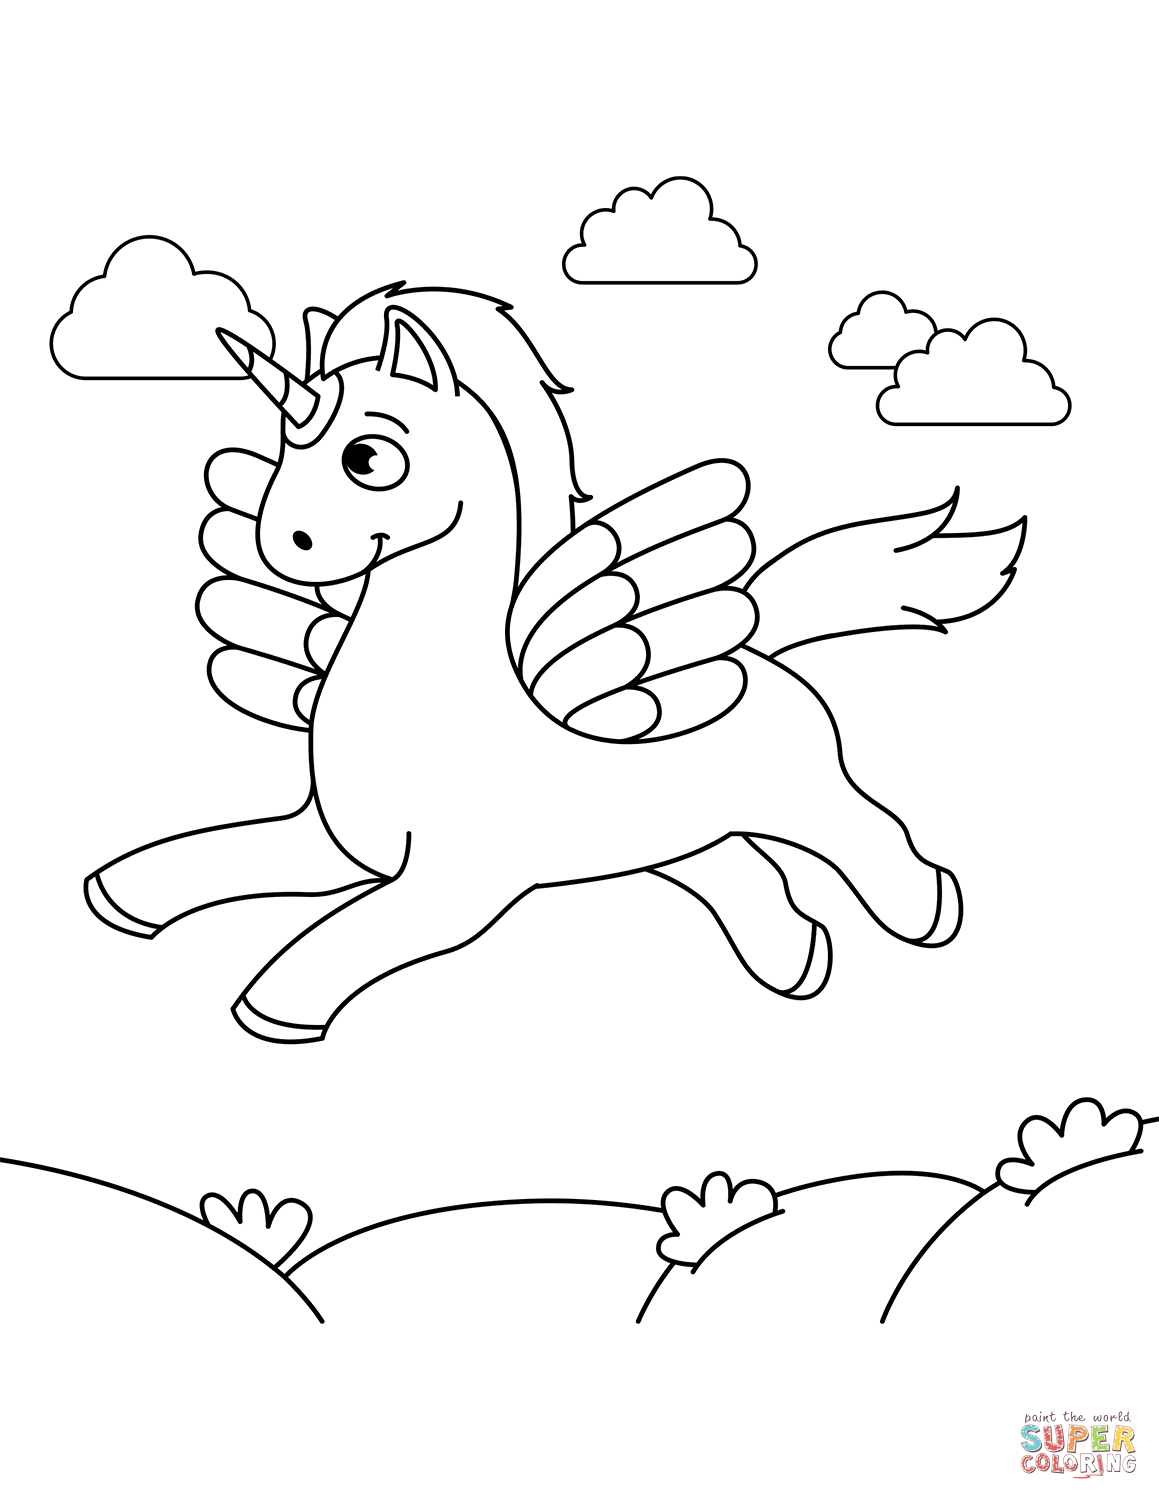 Alicorn coloring page | Free Printable Coloring Pages